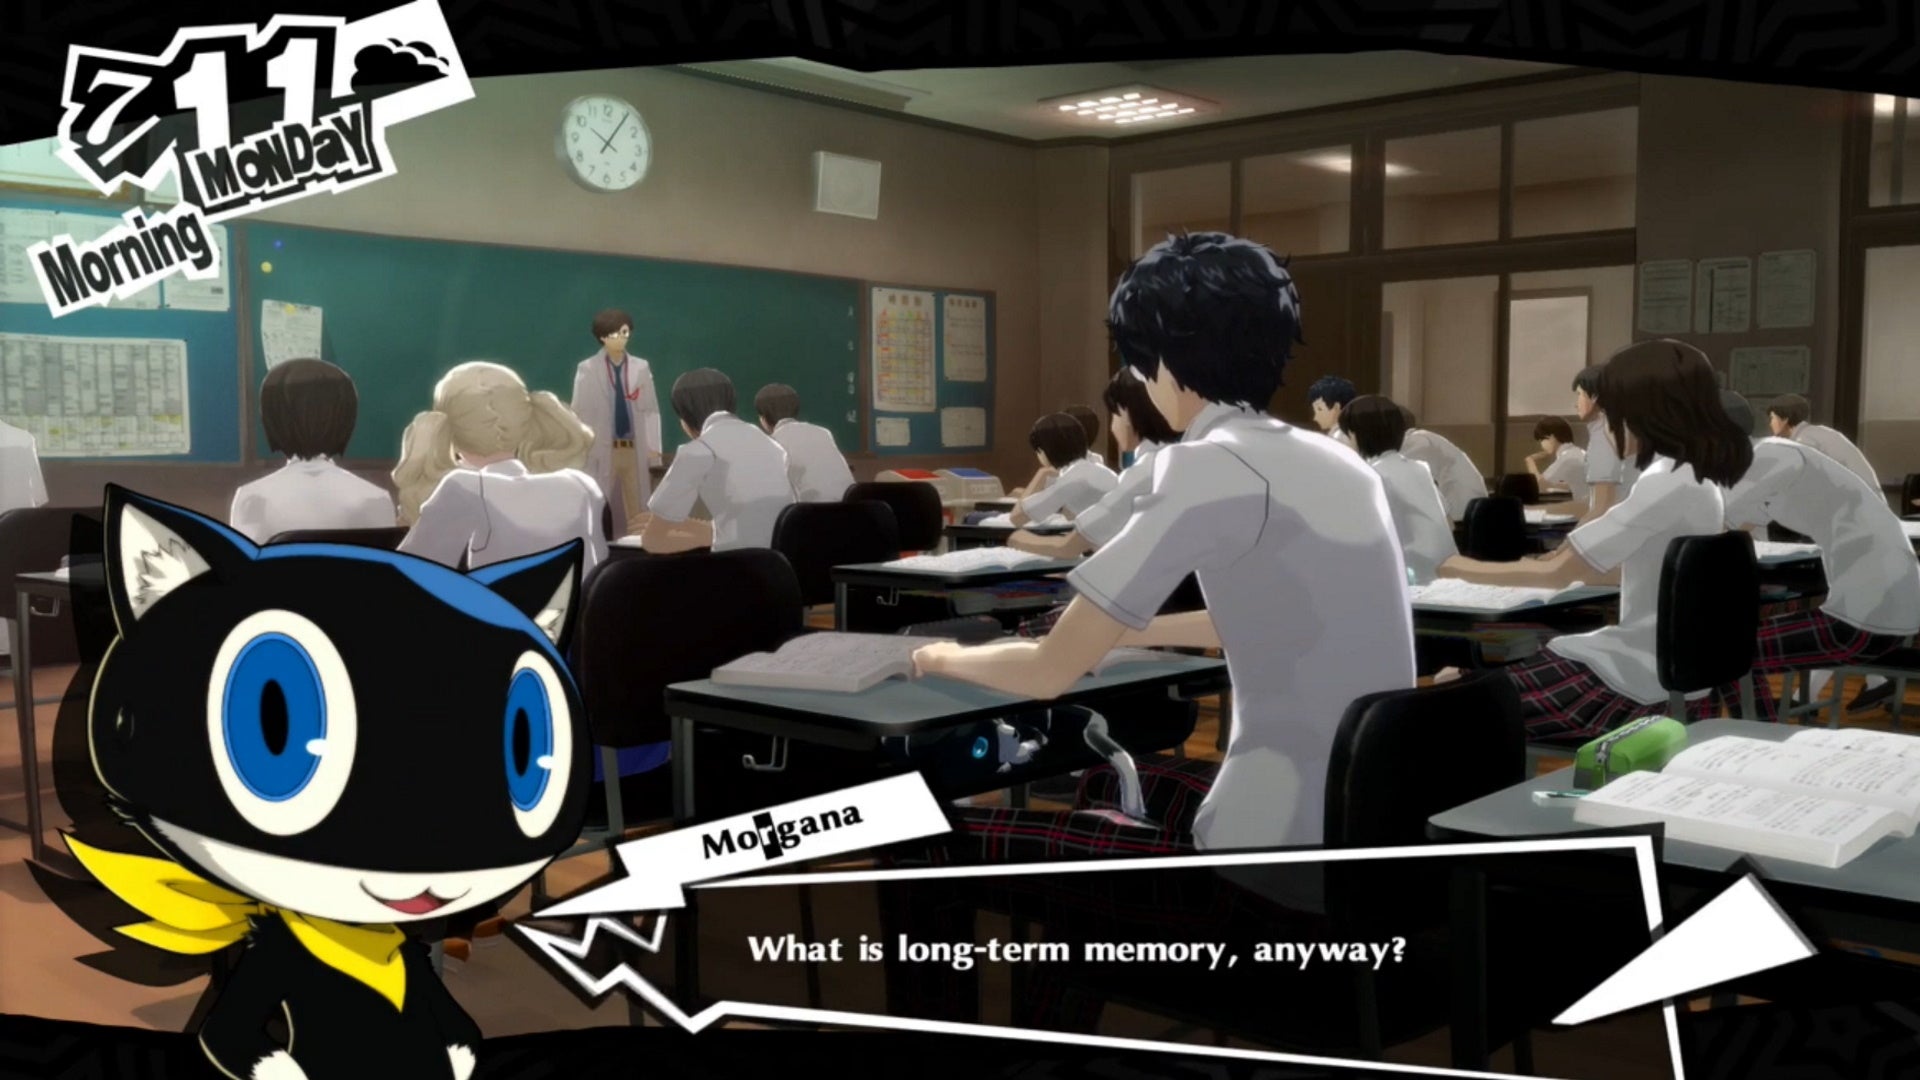 Persona 5 Royal classroom answers July: An anime cat is asking what a long-term memory is